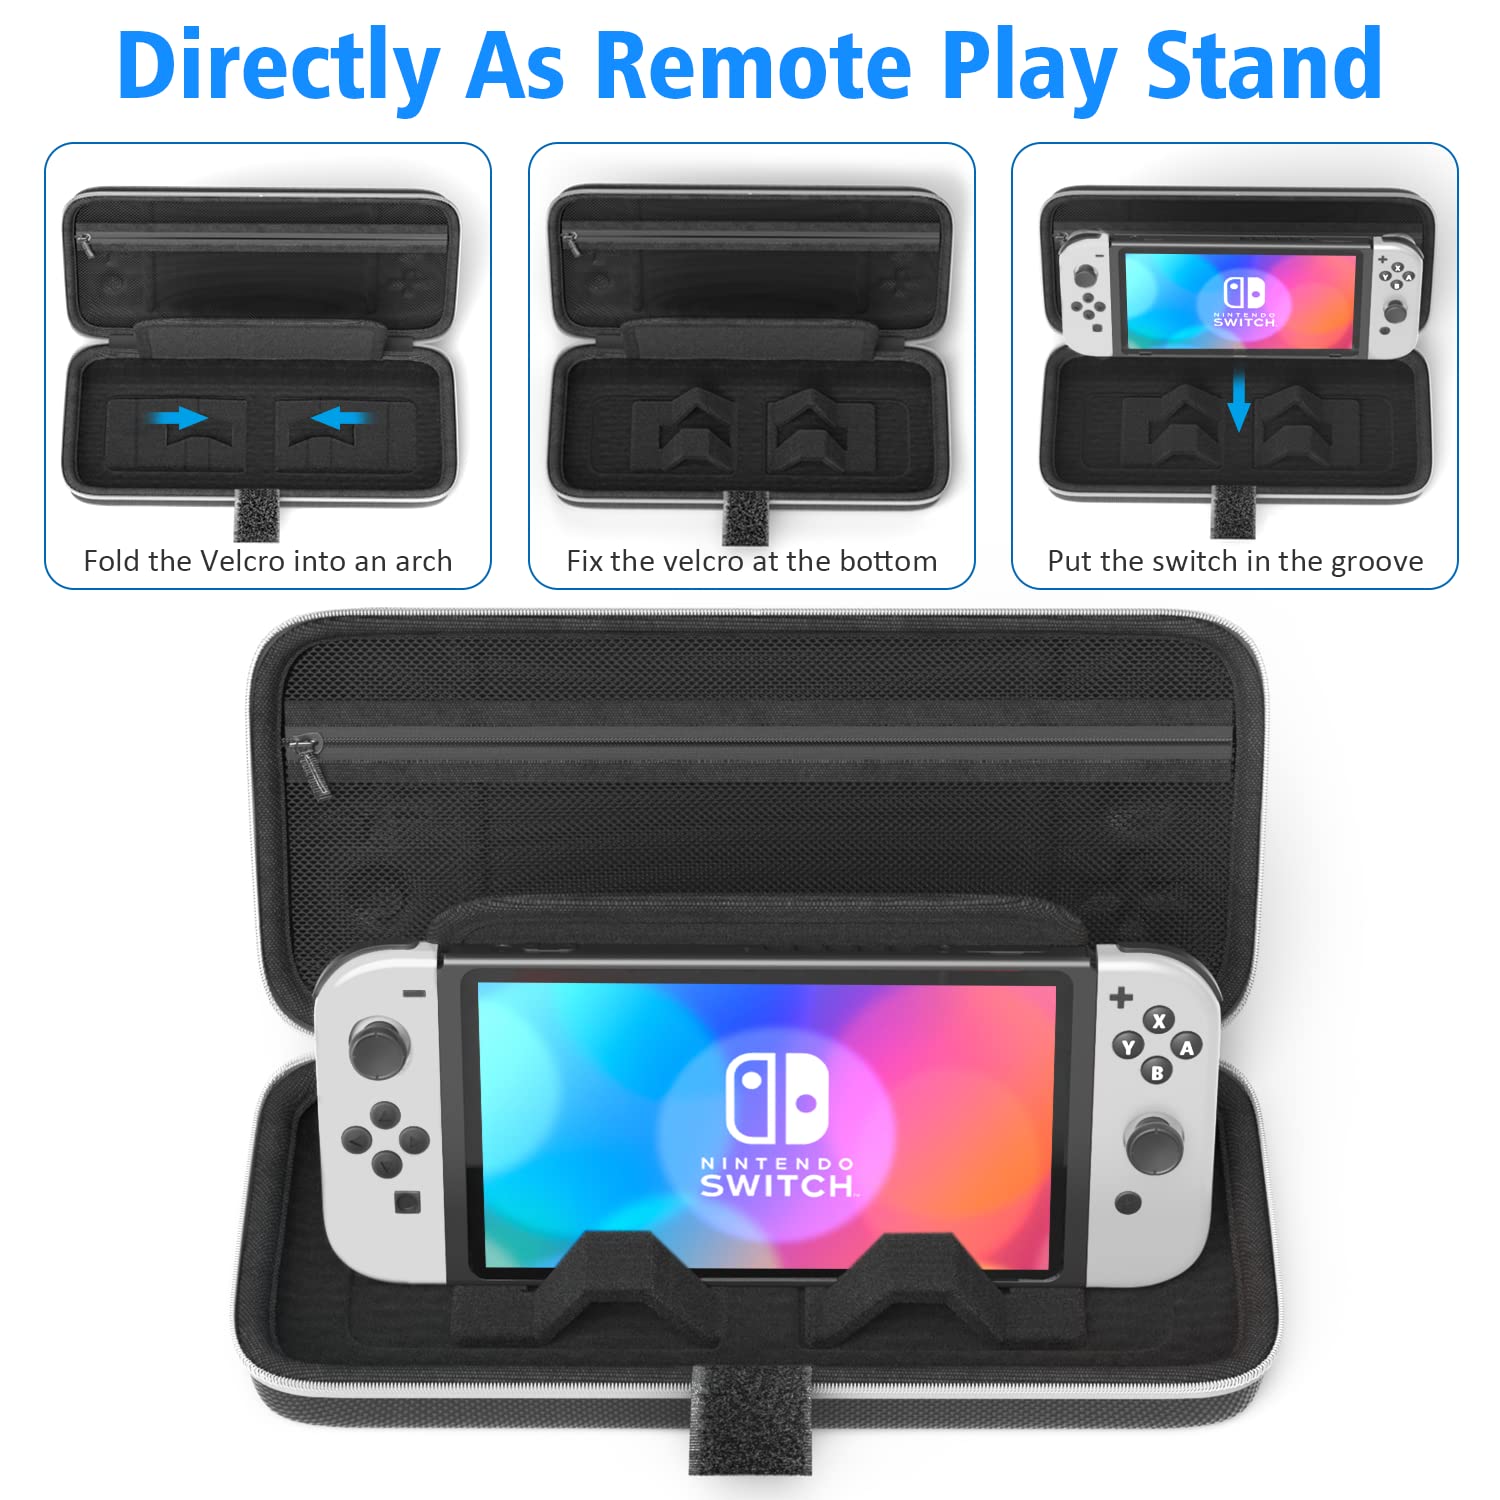 OIVO Switch OLED Case for Switch OLED New Model, Large Capacity Switch Carrying Case Portable Travel Hard Case with Game Card Storage Slots Compatible with Nintendo Switch/OLED Model